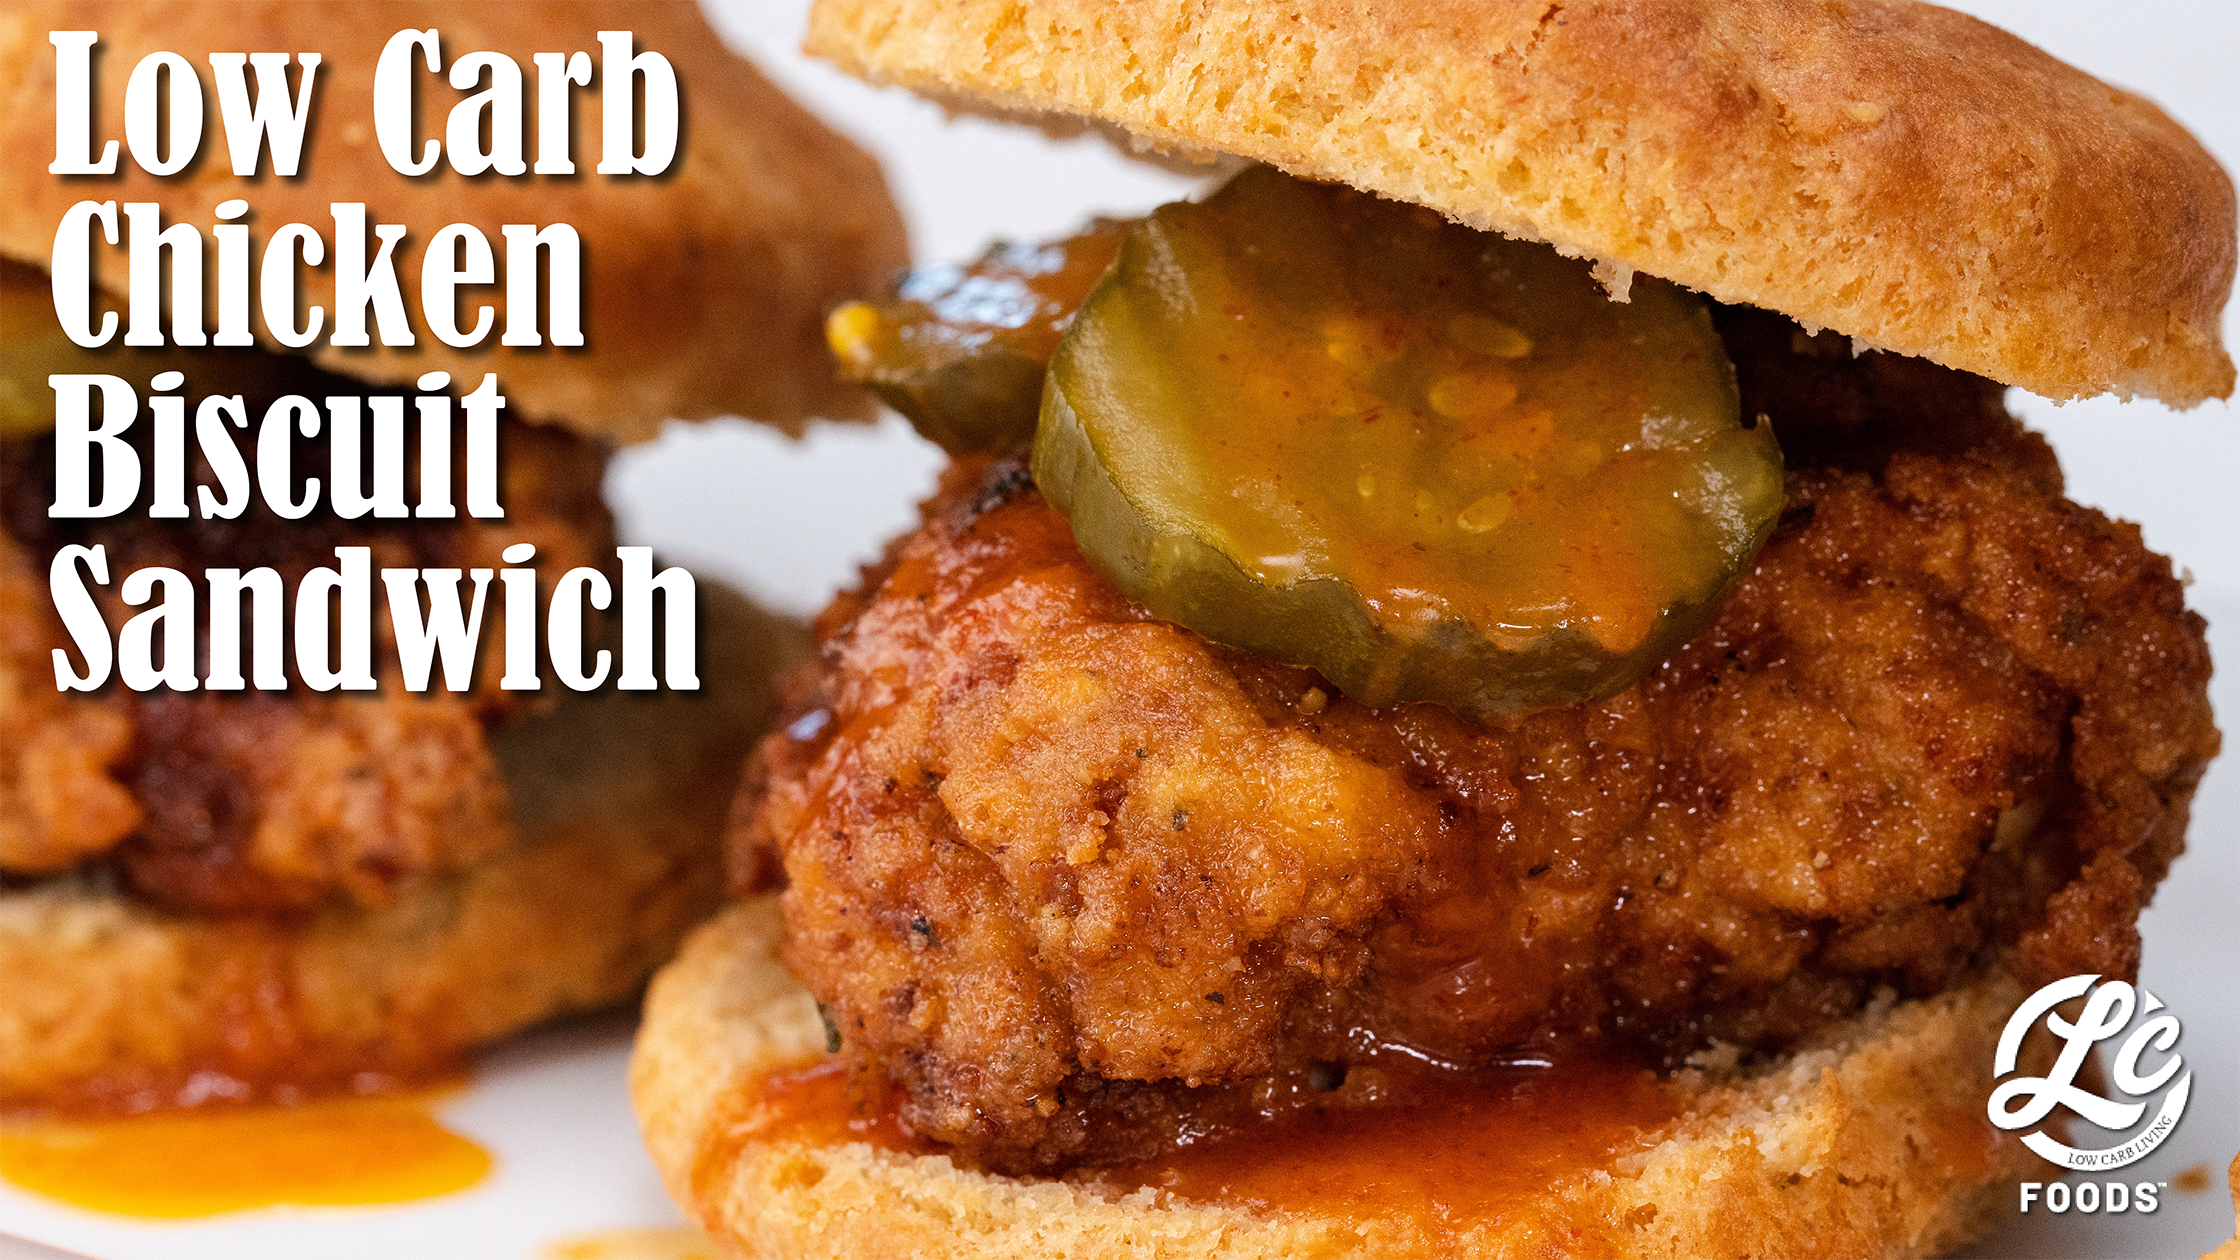 Thumbnail for Low Carb Chicken Biscuit Sandwich